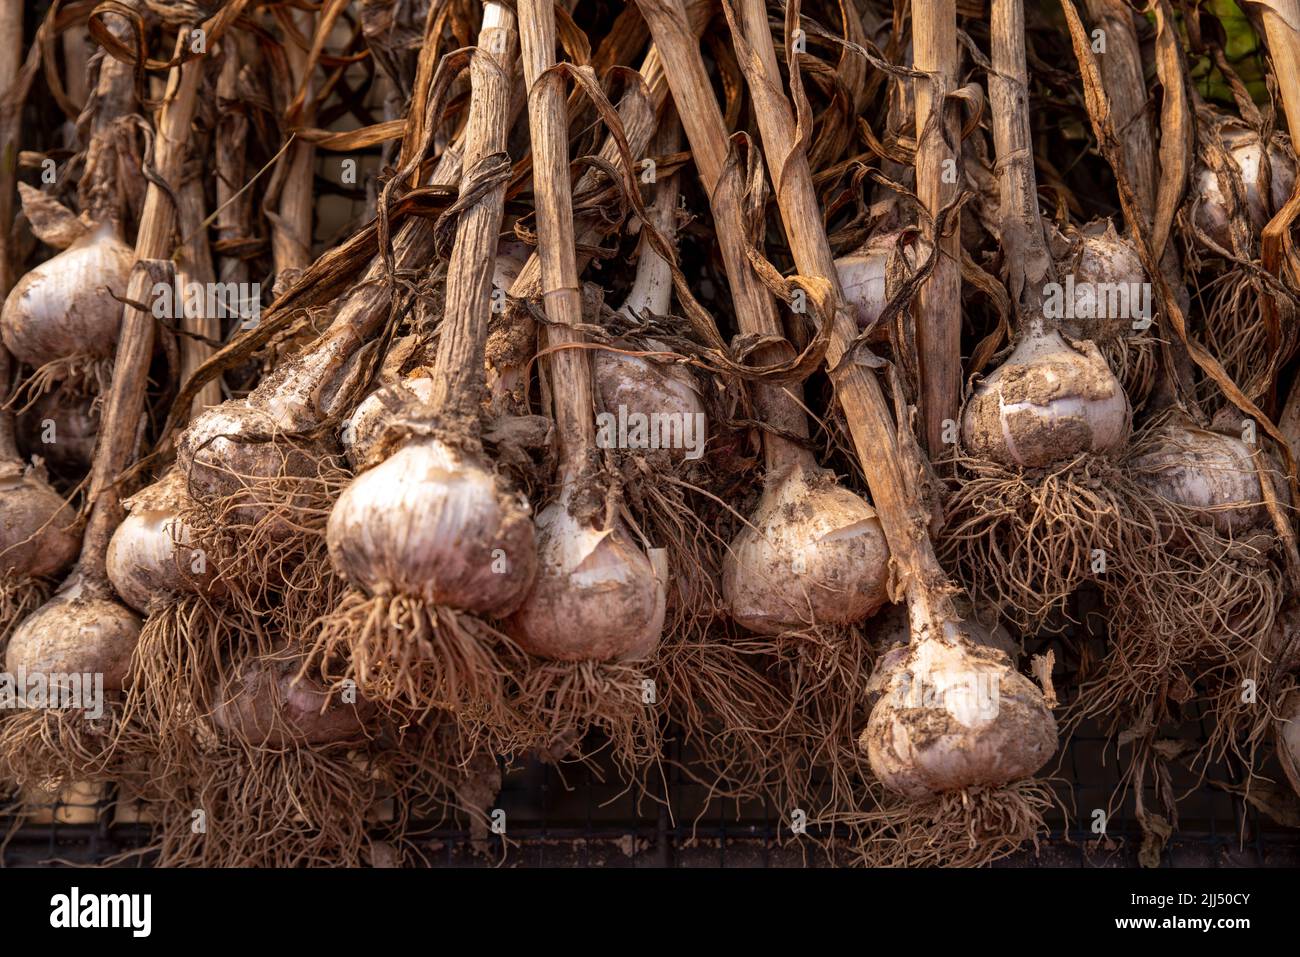 Closeup of harvested garlic drying on screens in a barn Stock Photo